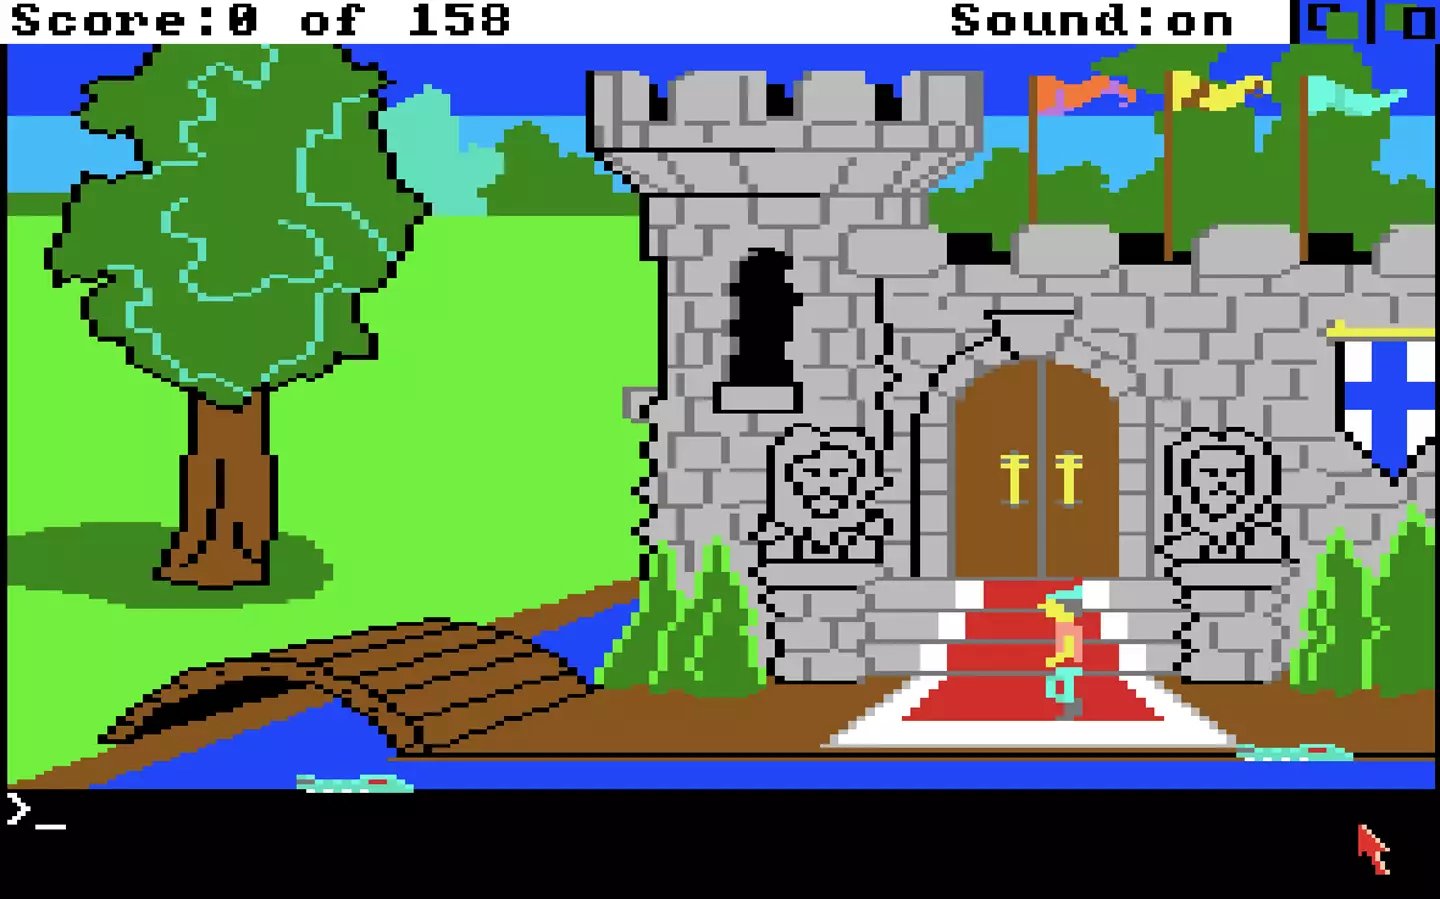 King’s Quest /